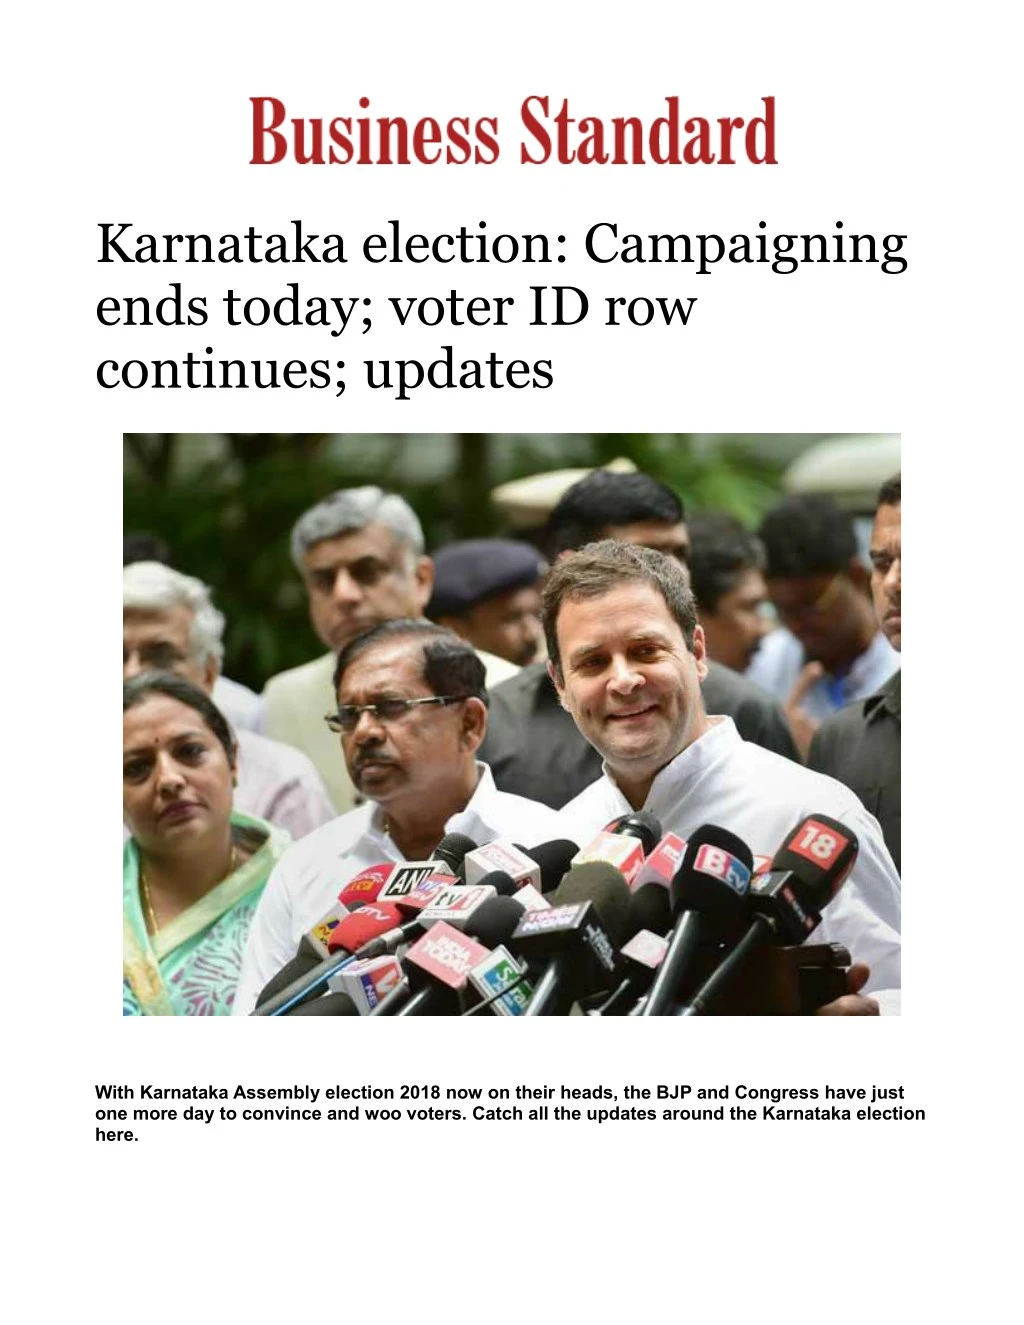 karnataka election campaigning ends today voter